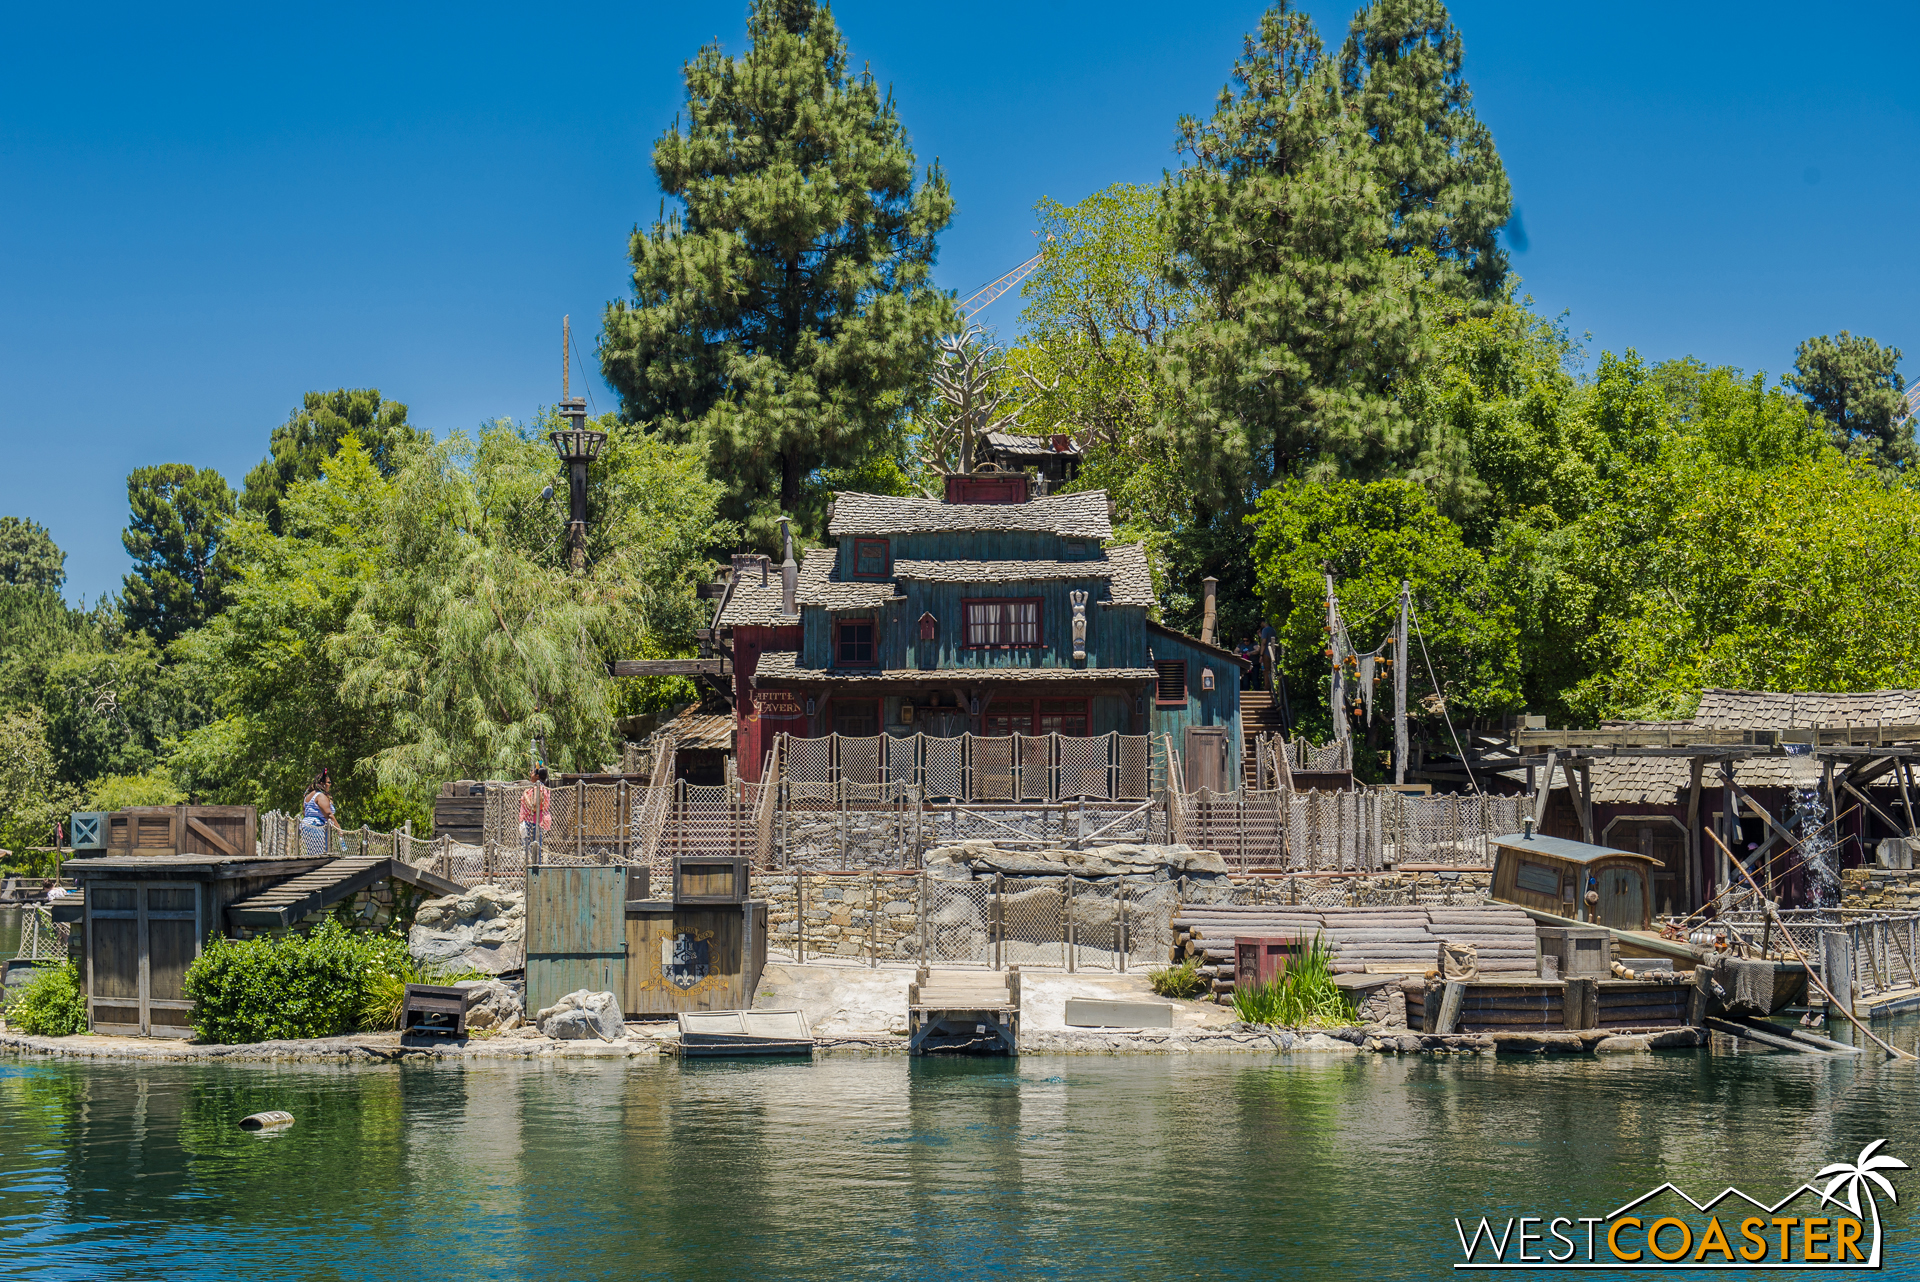  Tom Sawyer Island reopened on Friday to... some fanfare?&nbsp; I'm not sure.&nbsp; But on Saturday, things were relatively quiet. 